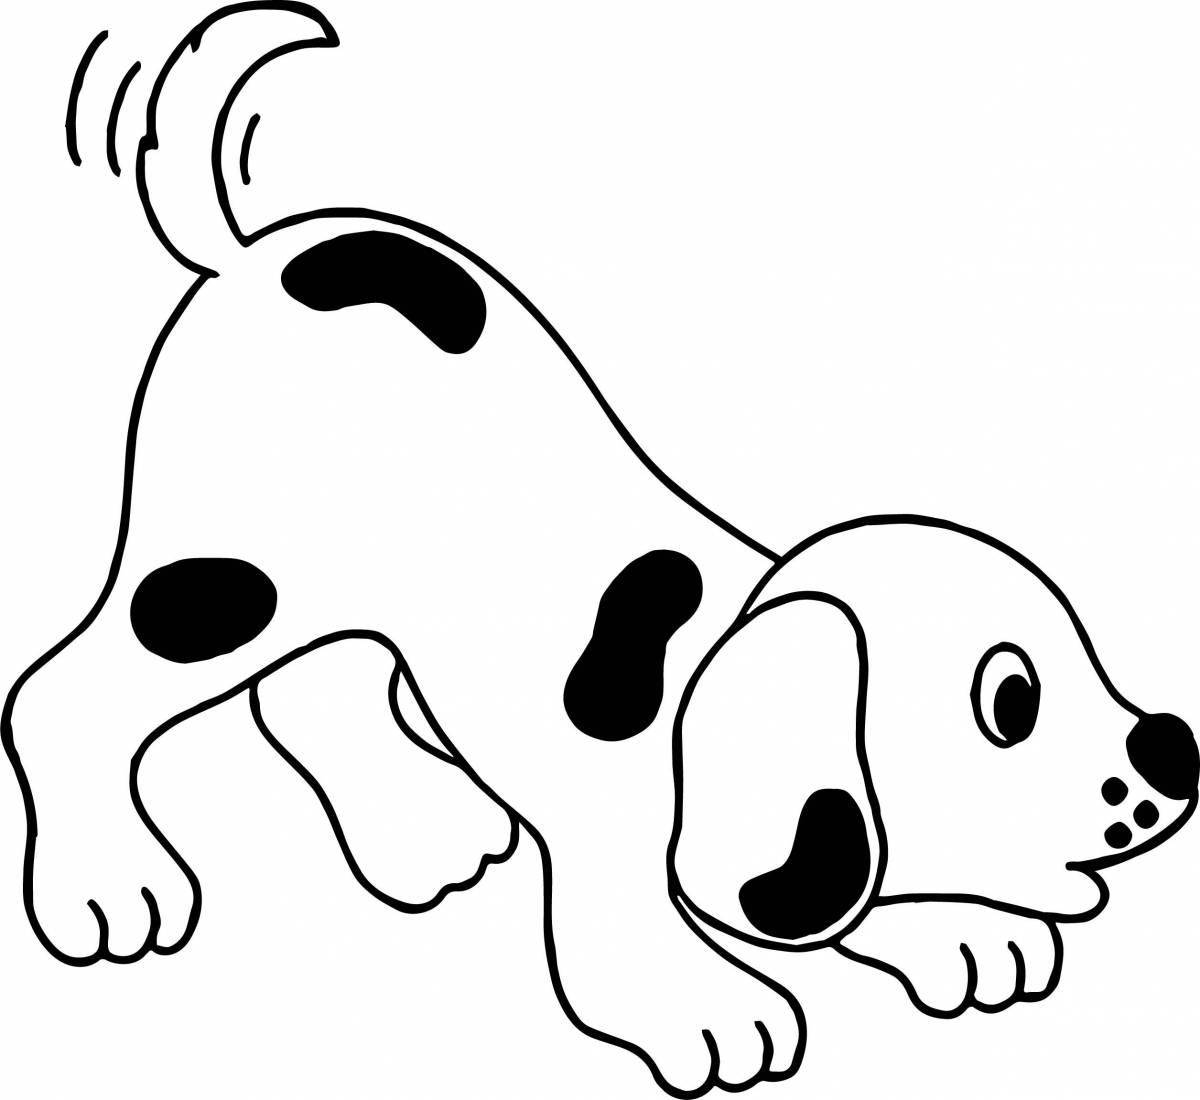 Animated drawing of a dog for children